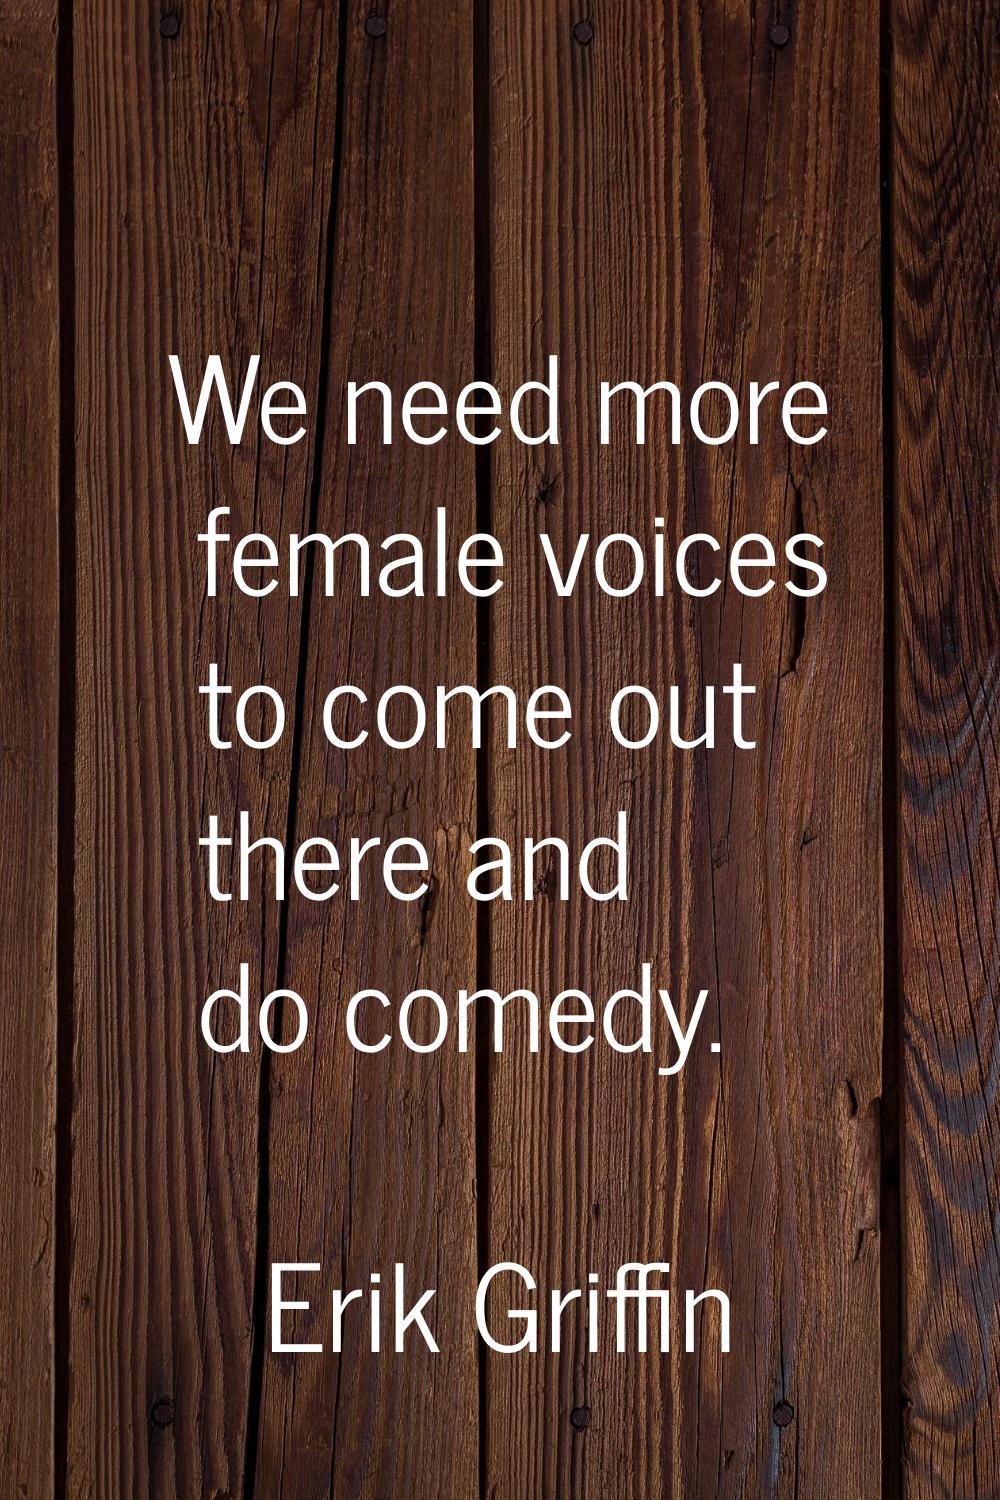 We need more female voices to come out there and do comedy.